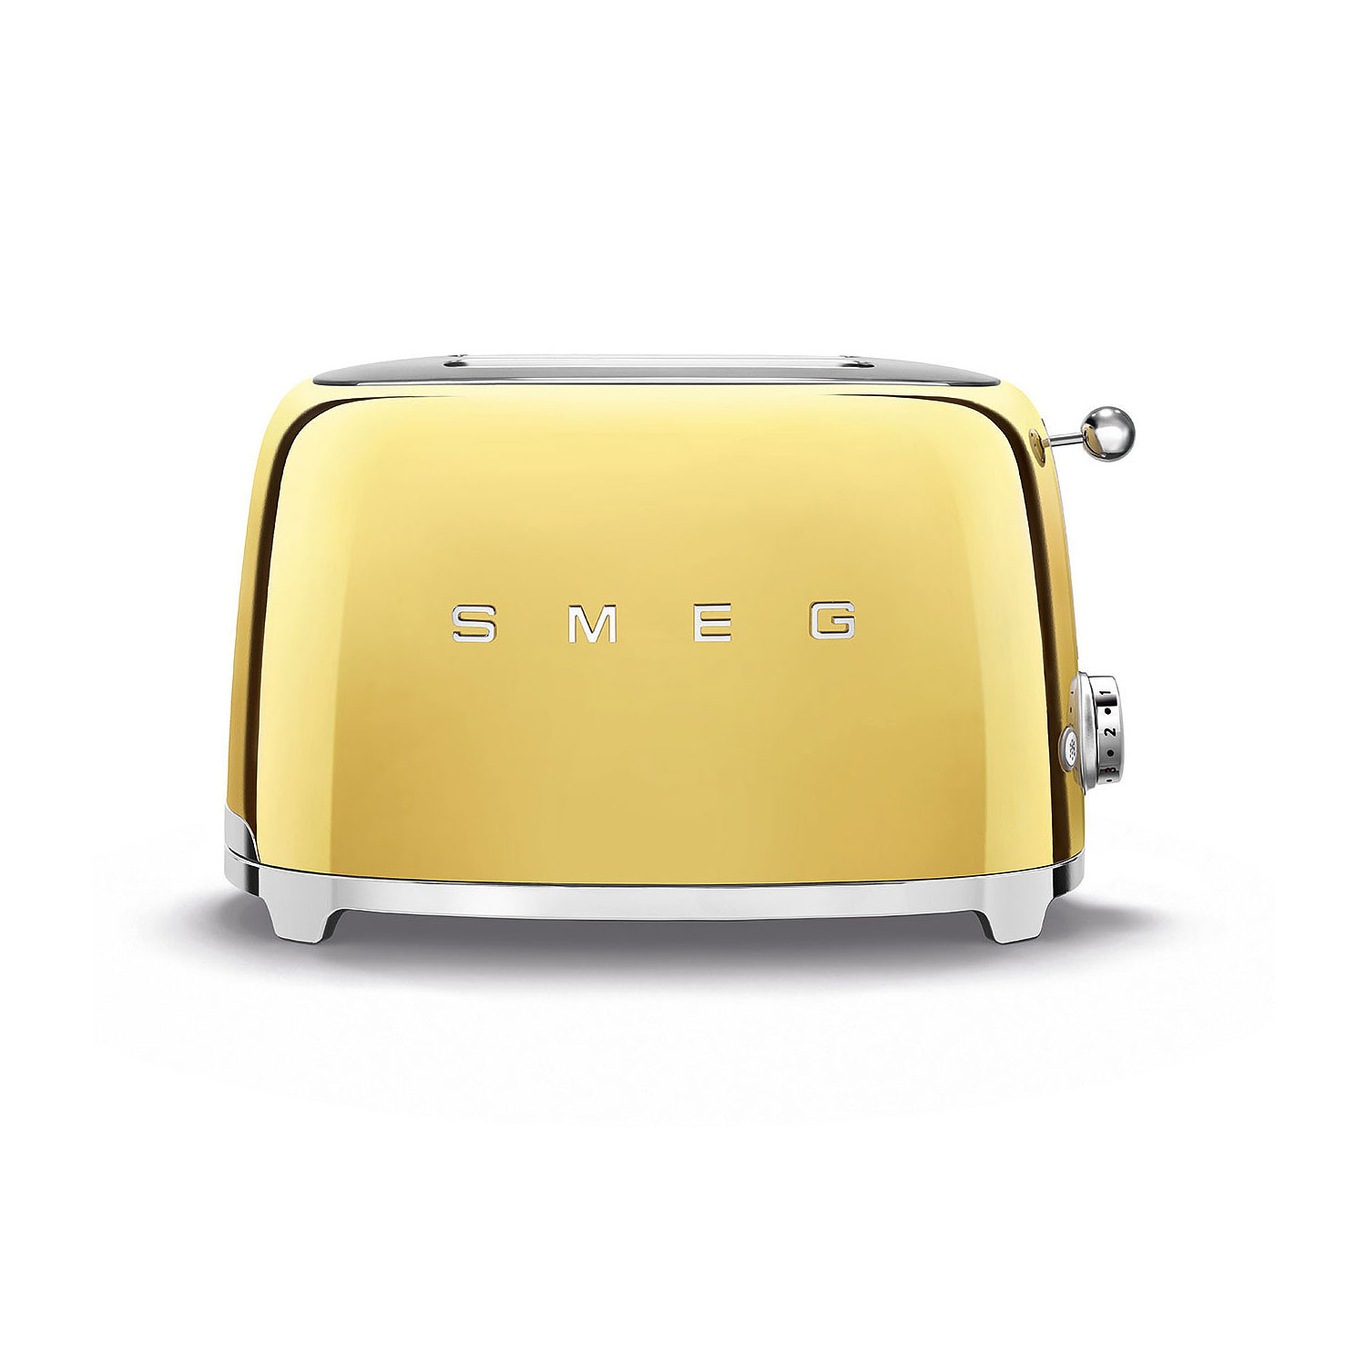 Toaster 2 Slices, Gold